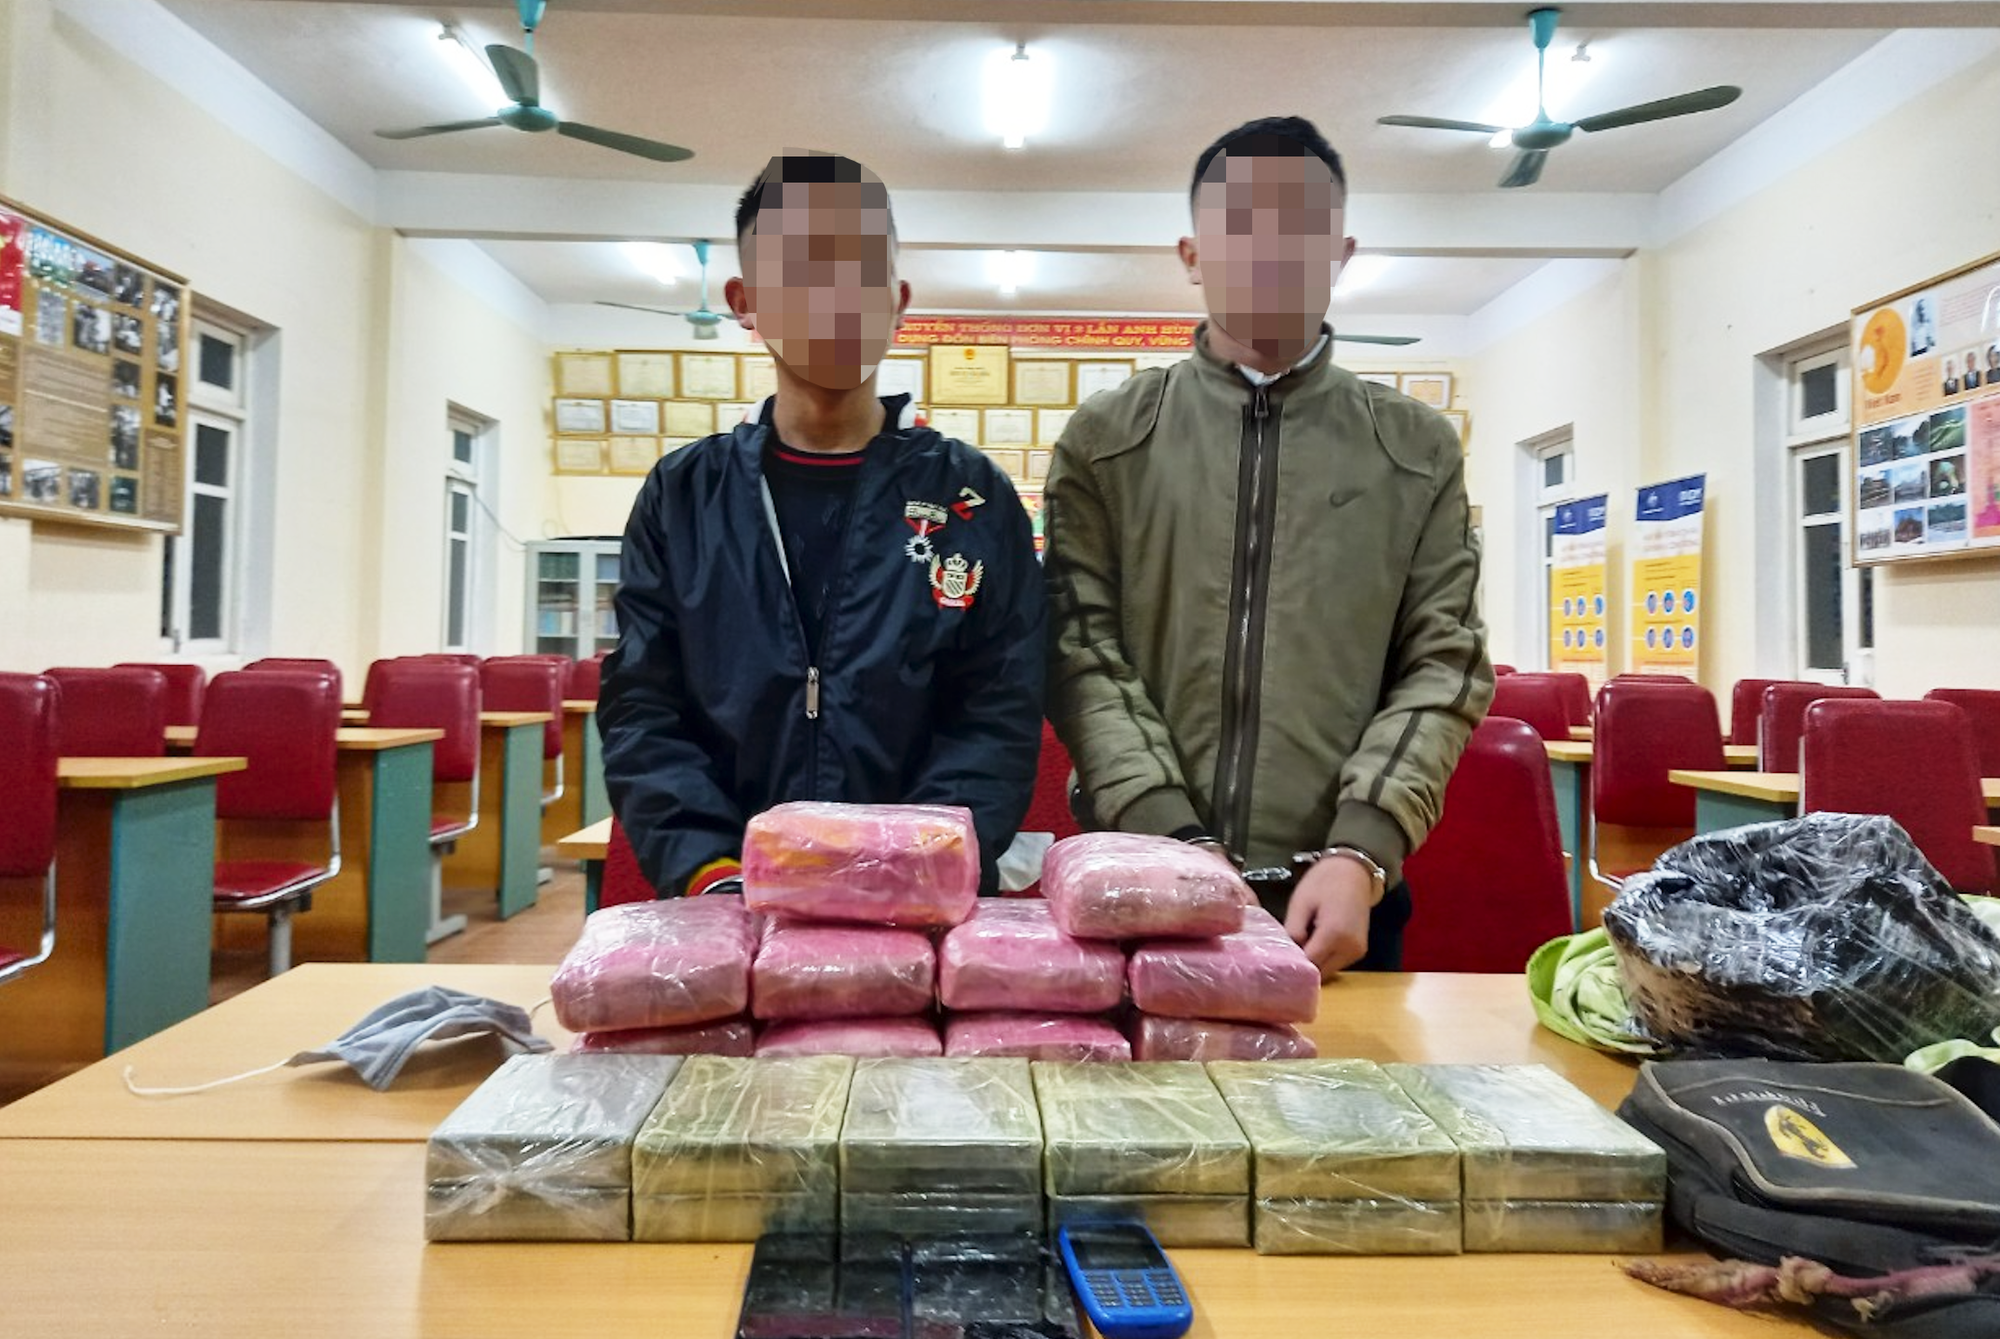 High school students nabbed for transporting heroin in north-central Vietnam